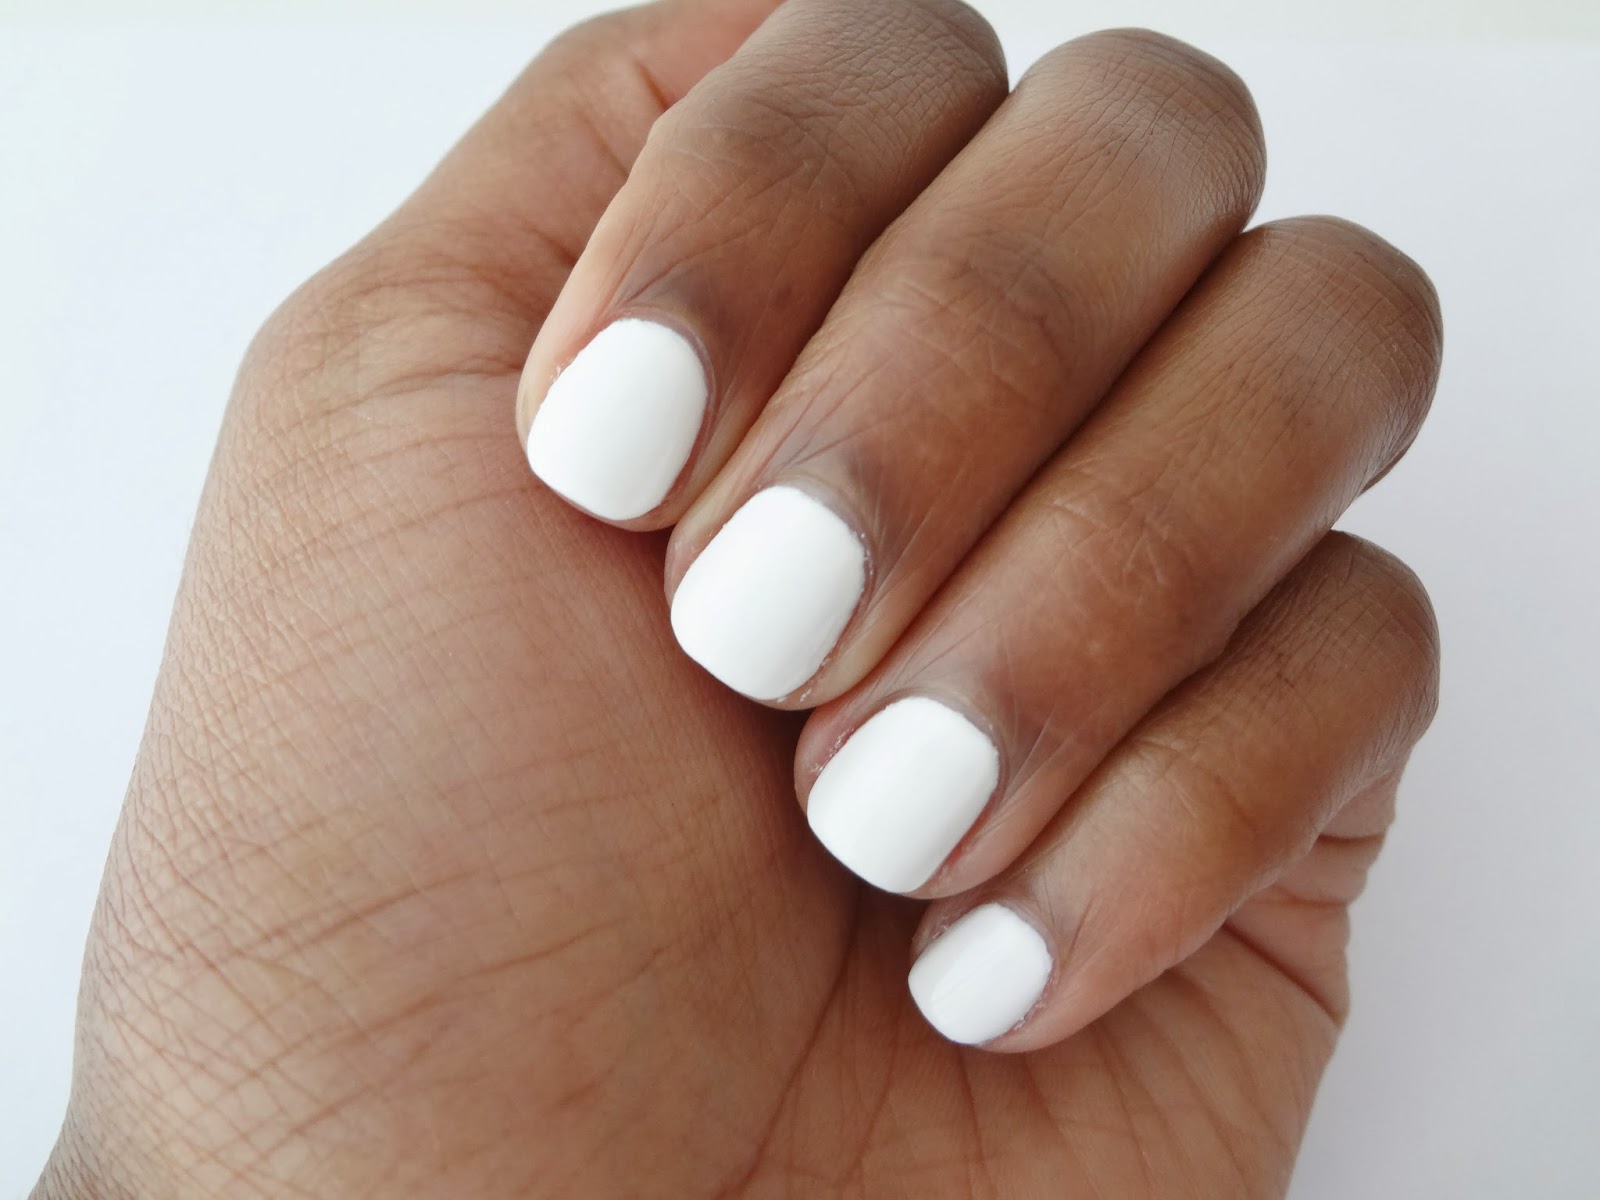 1. OPI Nail Lacquer in "Alpine Snow" - wide 4